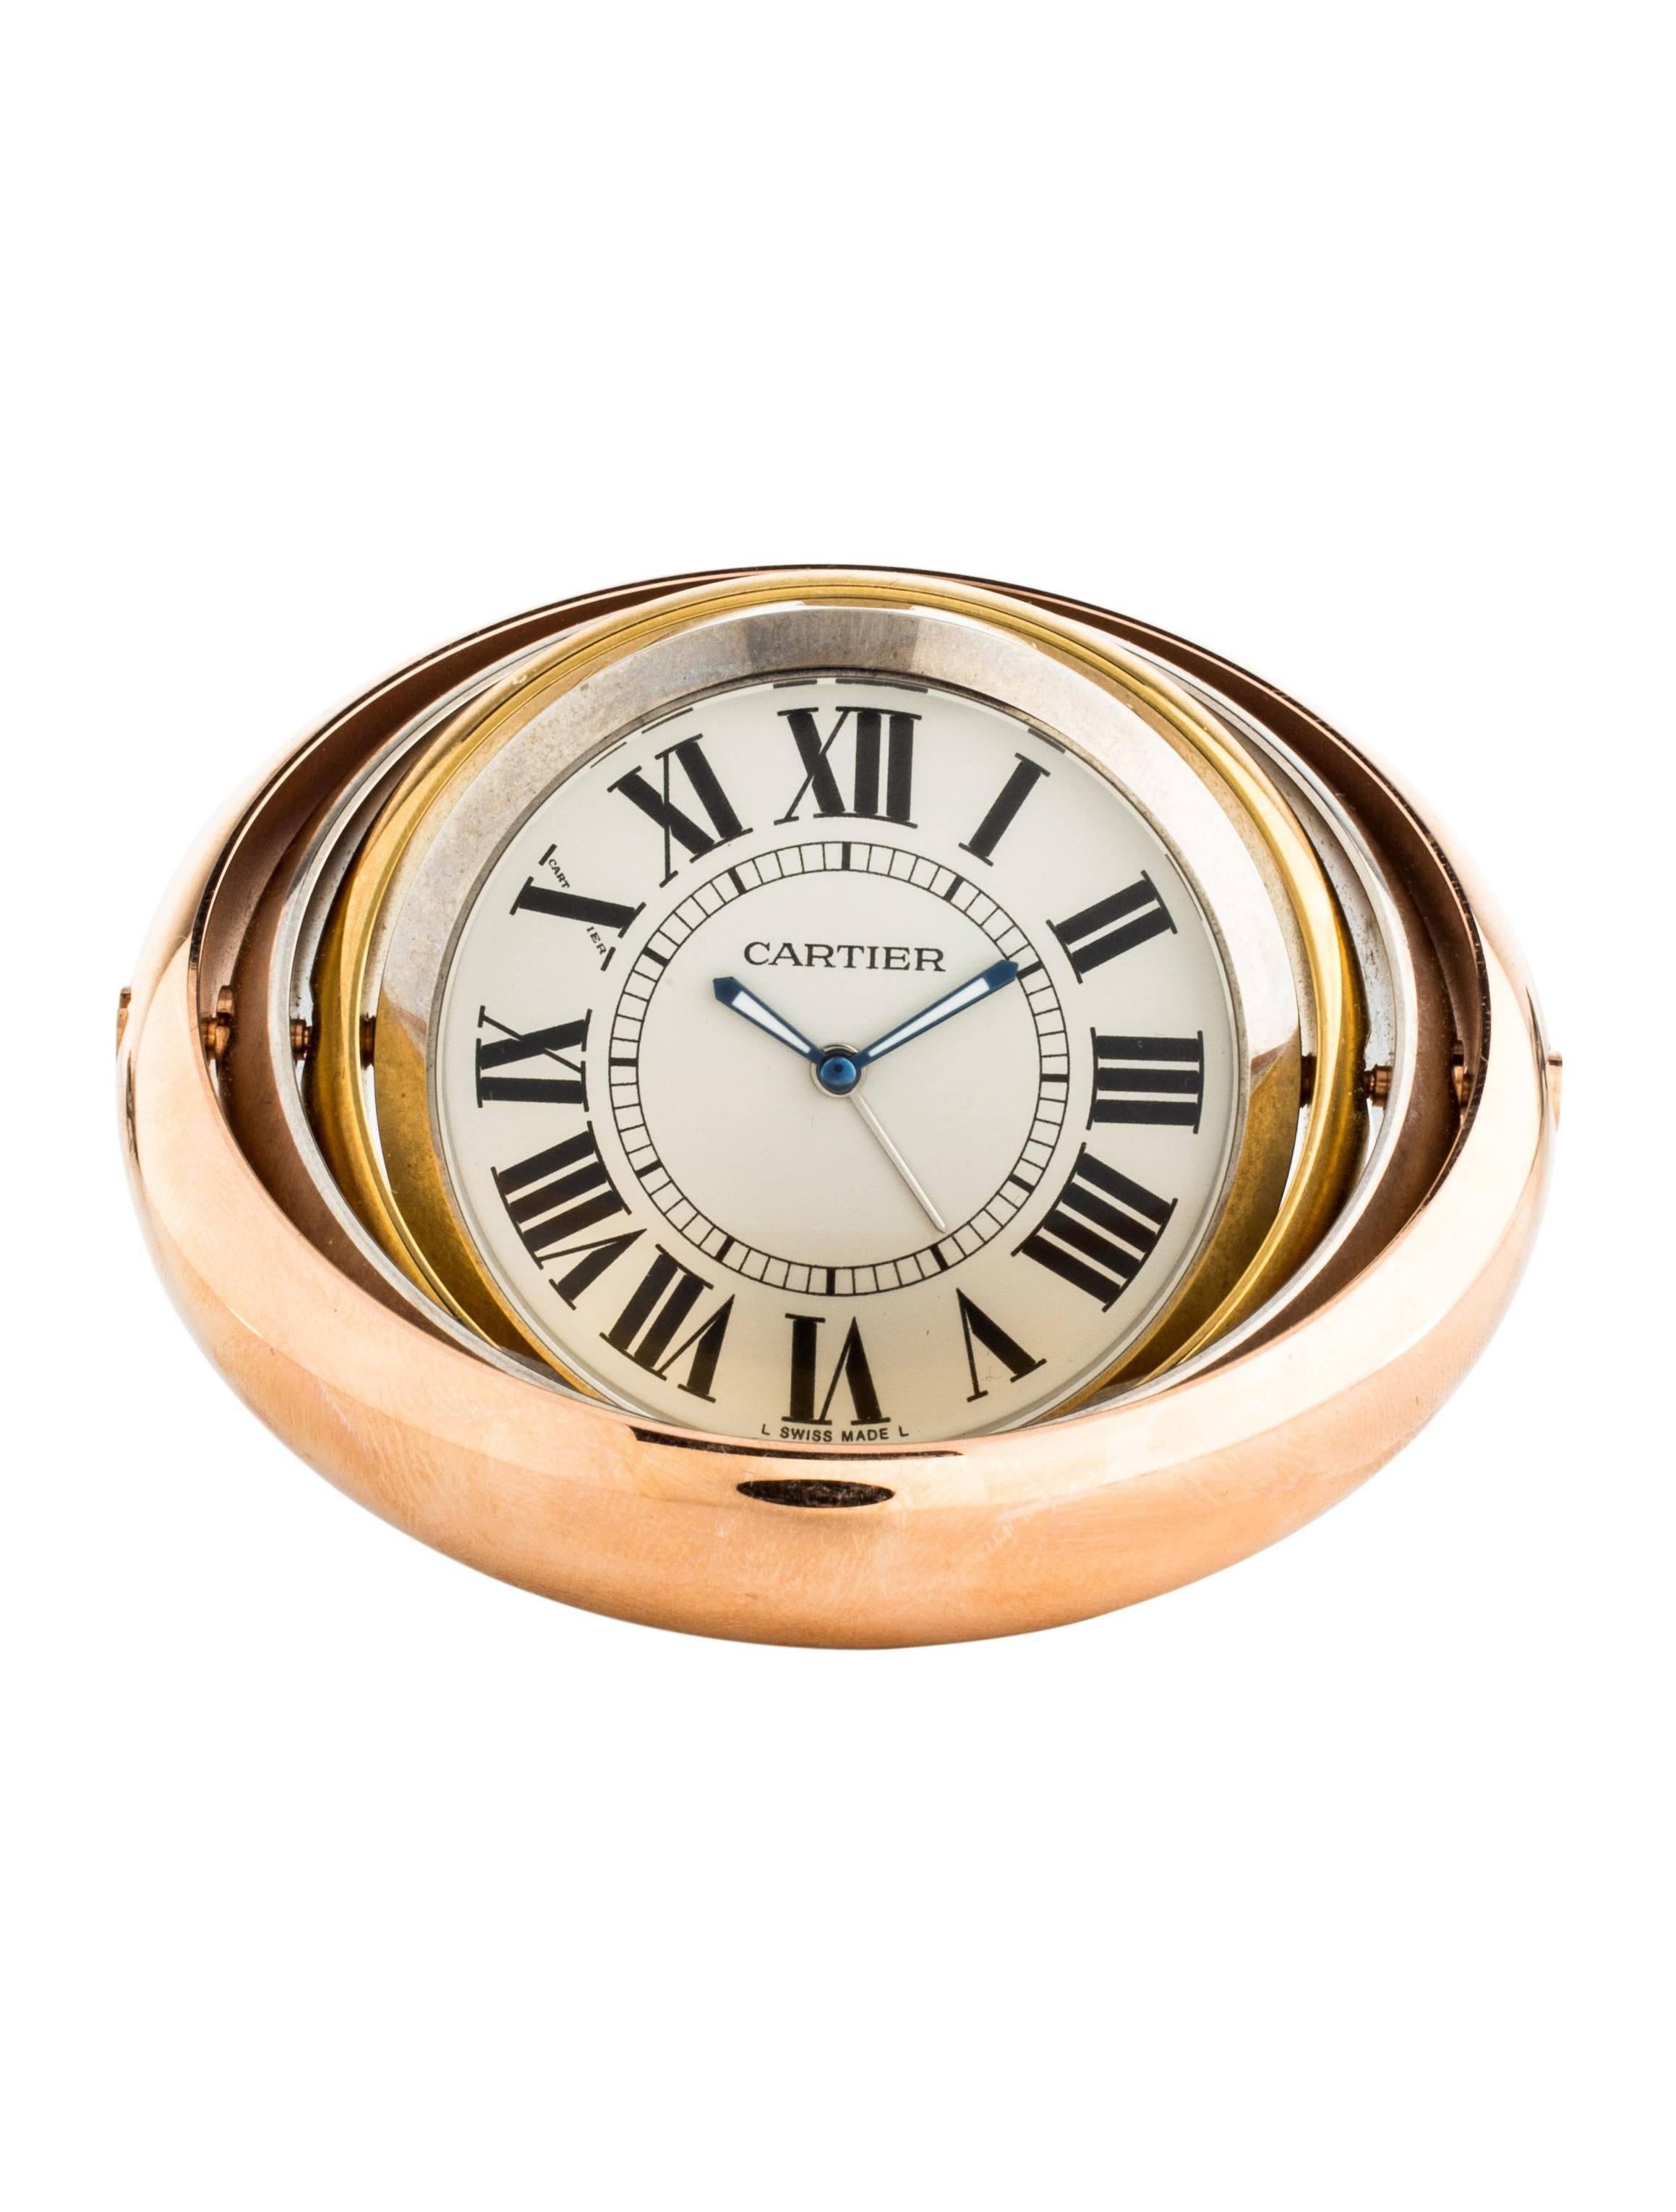 CURATOR'S NOTES

Cartier Tri Tone Silver Rose Gold Men's Round Rotating Travel Desk Table Clock   

Stainless steel
Gold, silver and rose gold tone 
Quartz movement
Rotating axis
Swiss made
Diameter 3